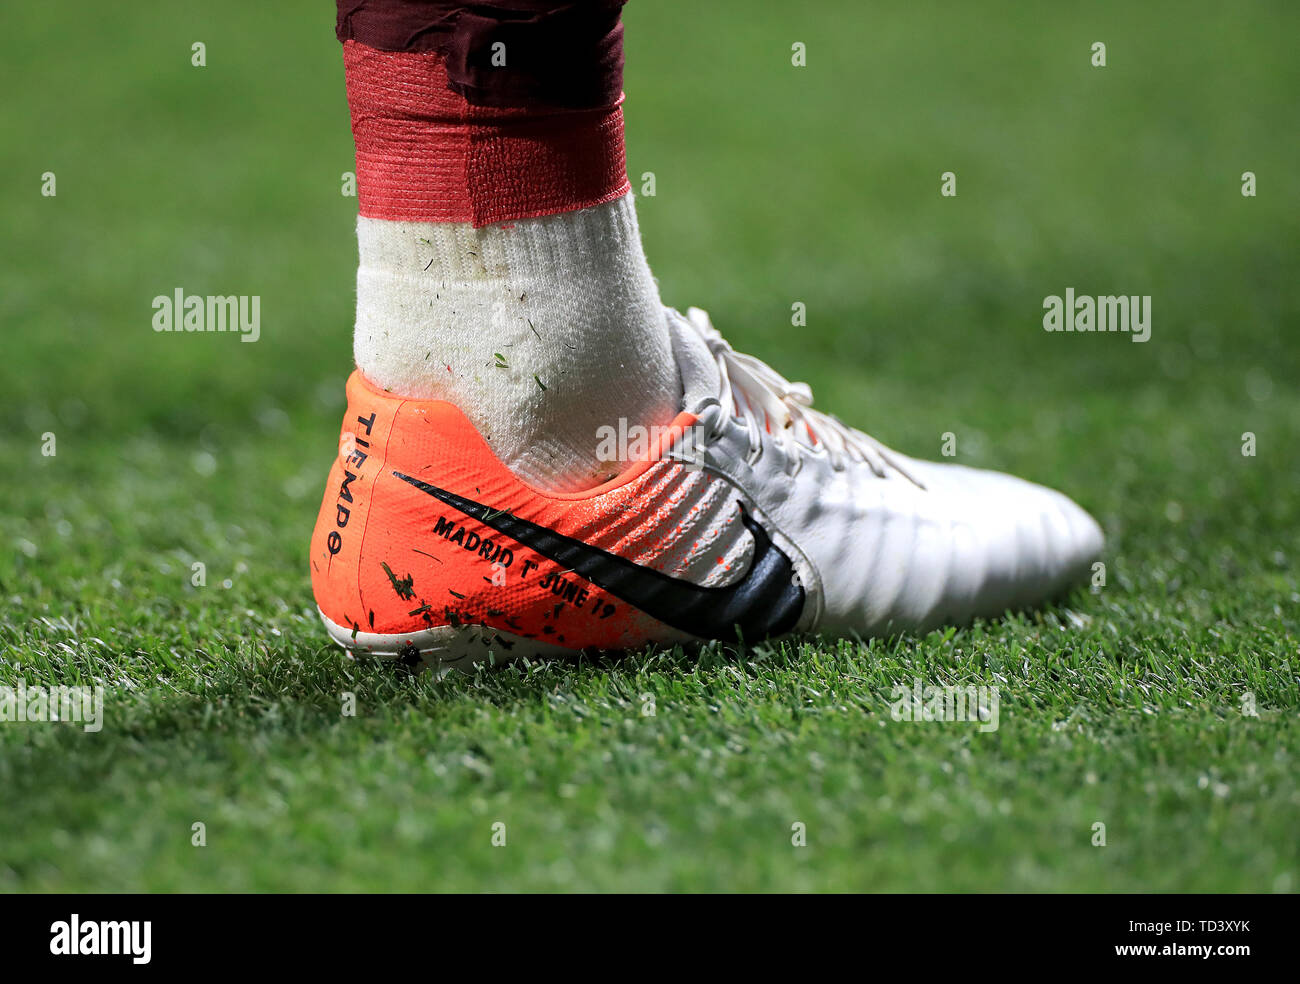 The special edition football boots worn by Liverpool's Jordan Henderson  during the UEFA Champions League Final at the Wanda Metropolitano, Madrid  Stock Photo - Alamy